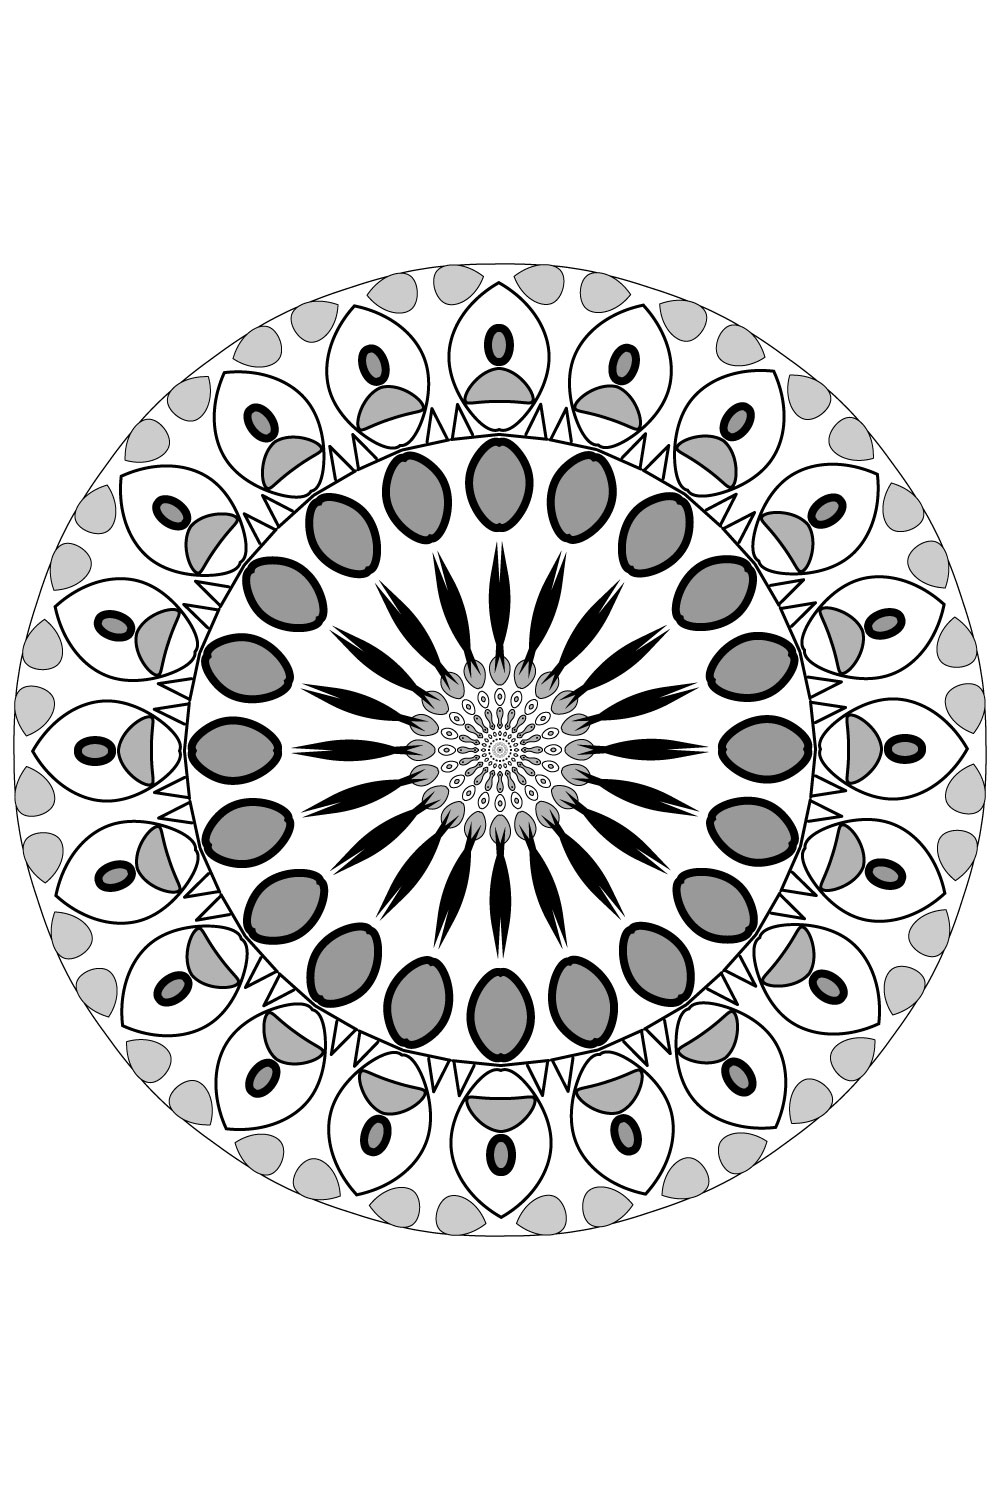 Mandala art with black and gray Petals pinterest preview image.